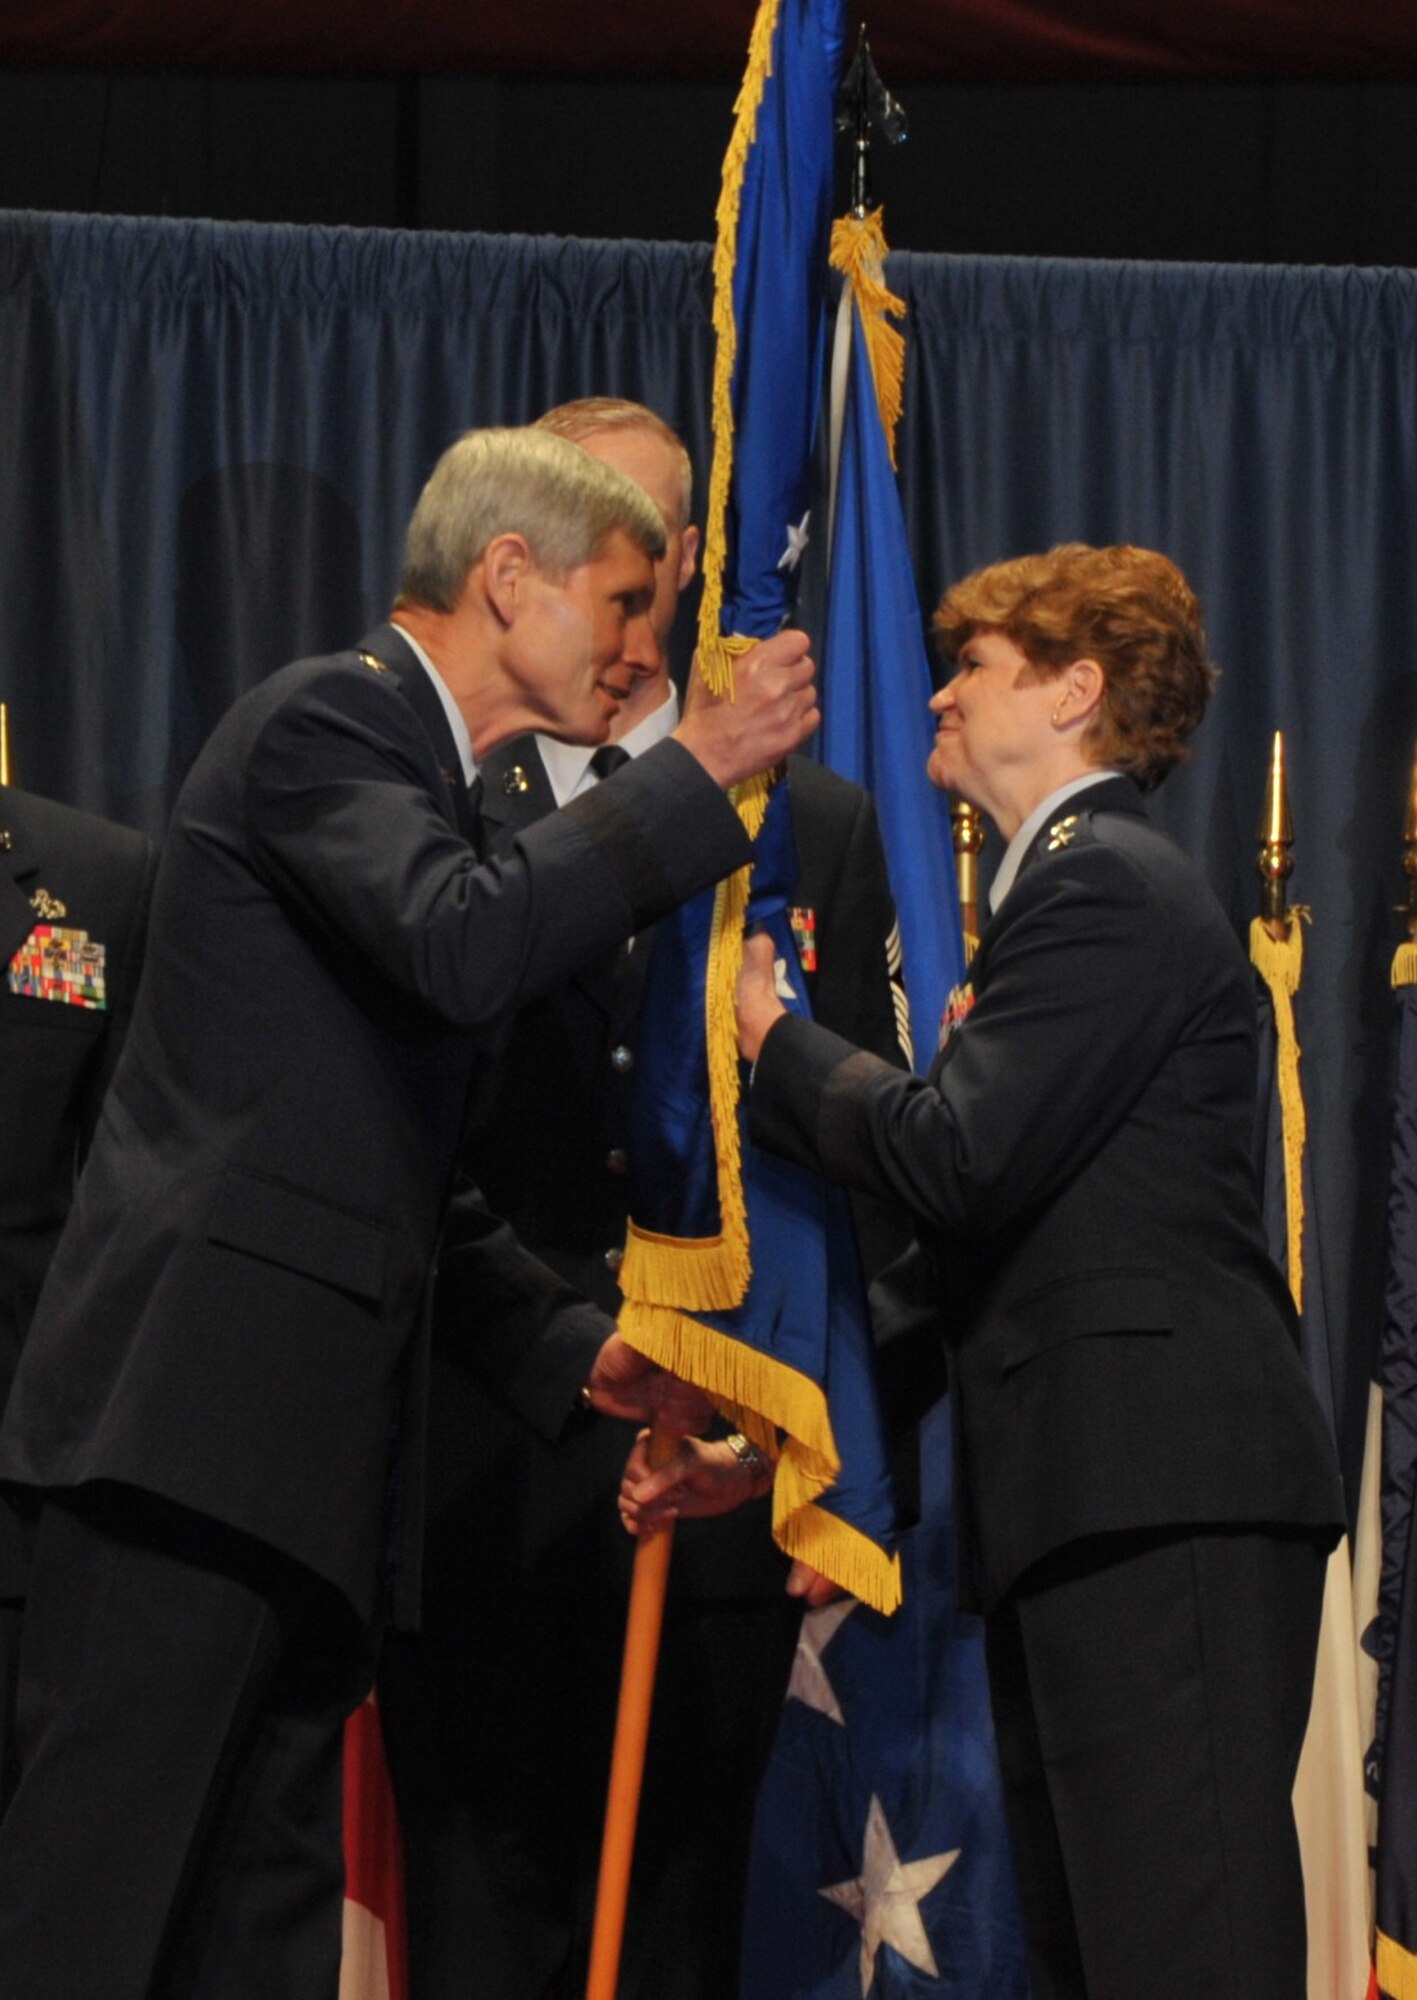 In the time-honored military tradition signifying assumption of command, Air Force Chief of Staff Gen. Norton Schwartz passes the Air Force Materiel Command guidon, or unit flag, to Gen. Janet Wolfenbarger. Wolfenbarger assumed command of AFMC June 5, 2012, in a ceremony at the National Museum of the U.S. Air Force. (U.S. Air Force photo/Michelle Gigante)